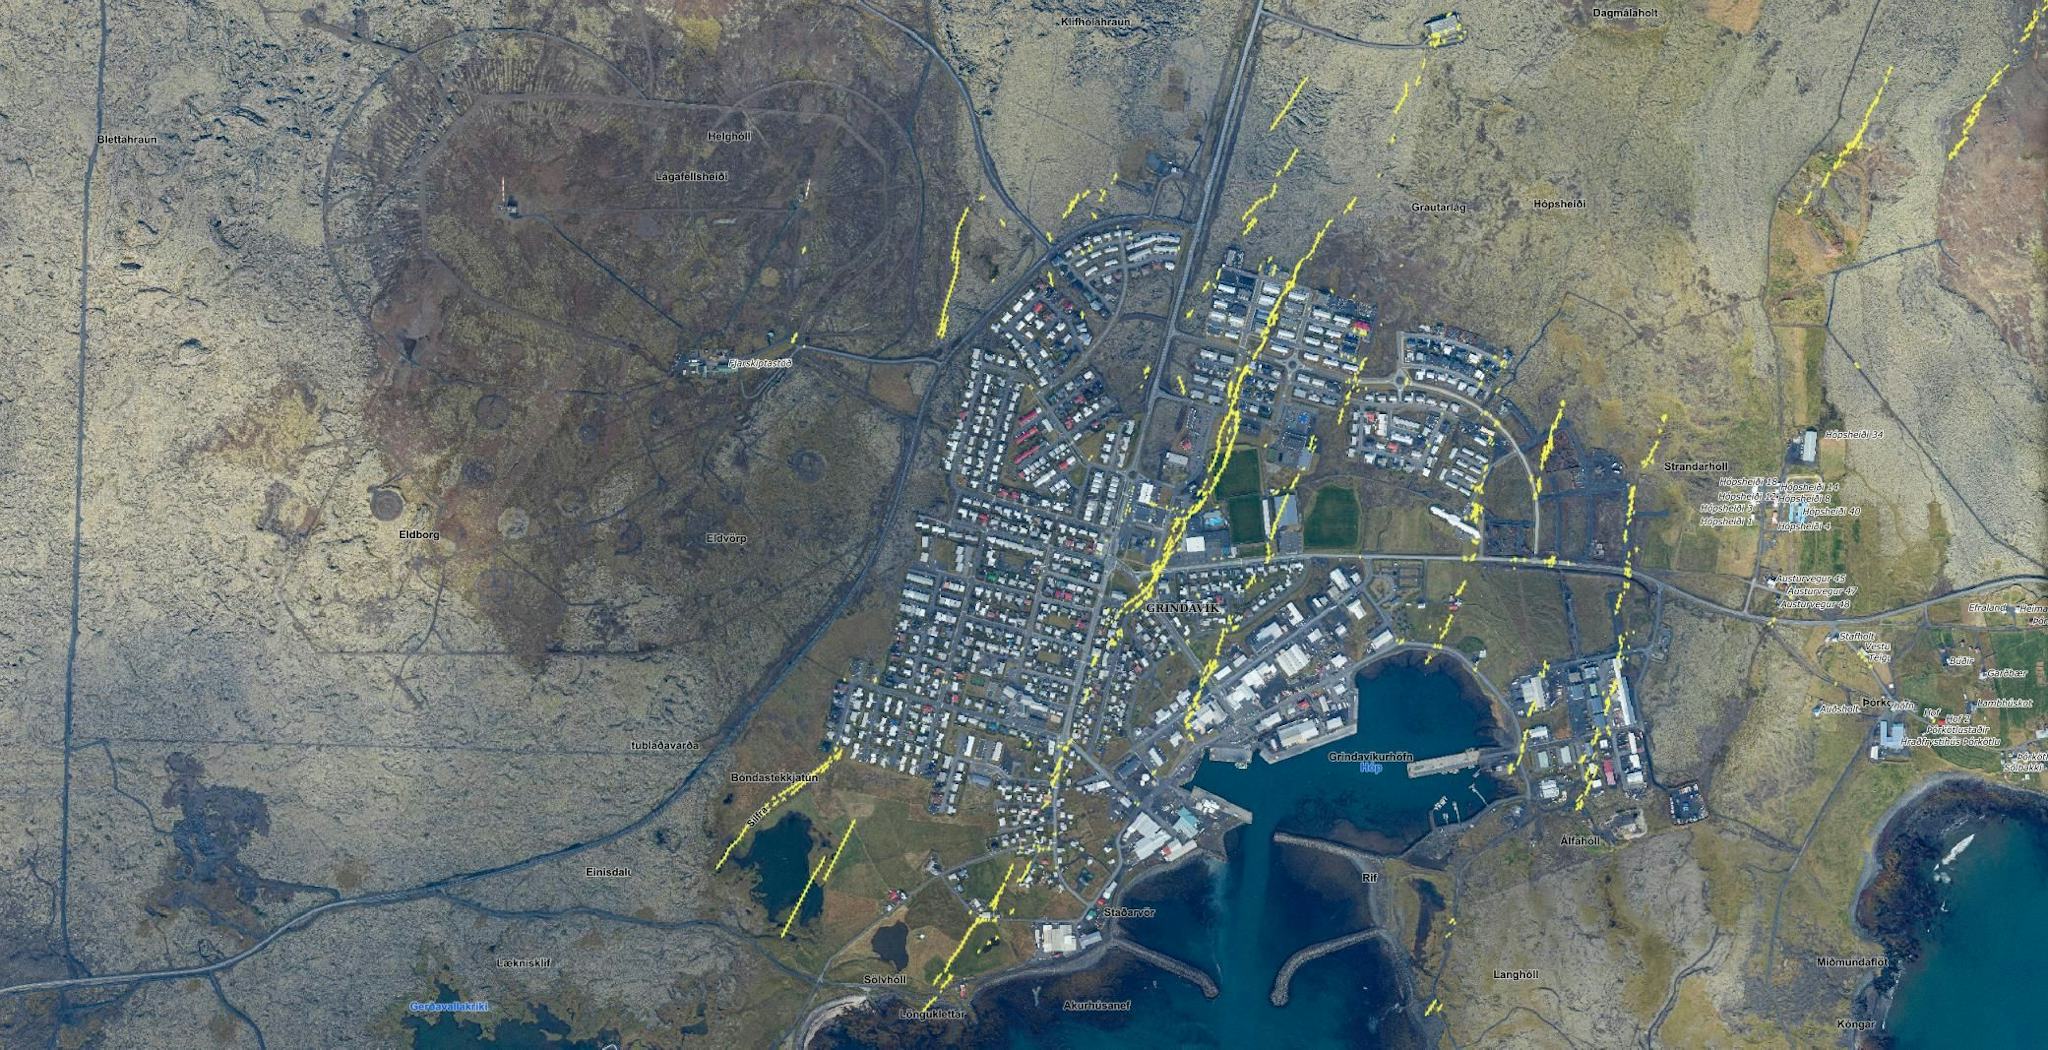 A satellite photo of a town